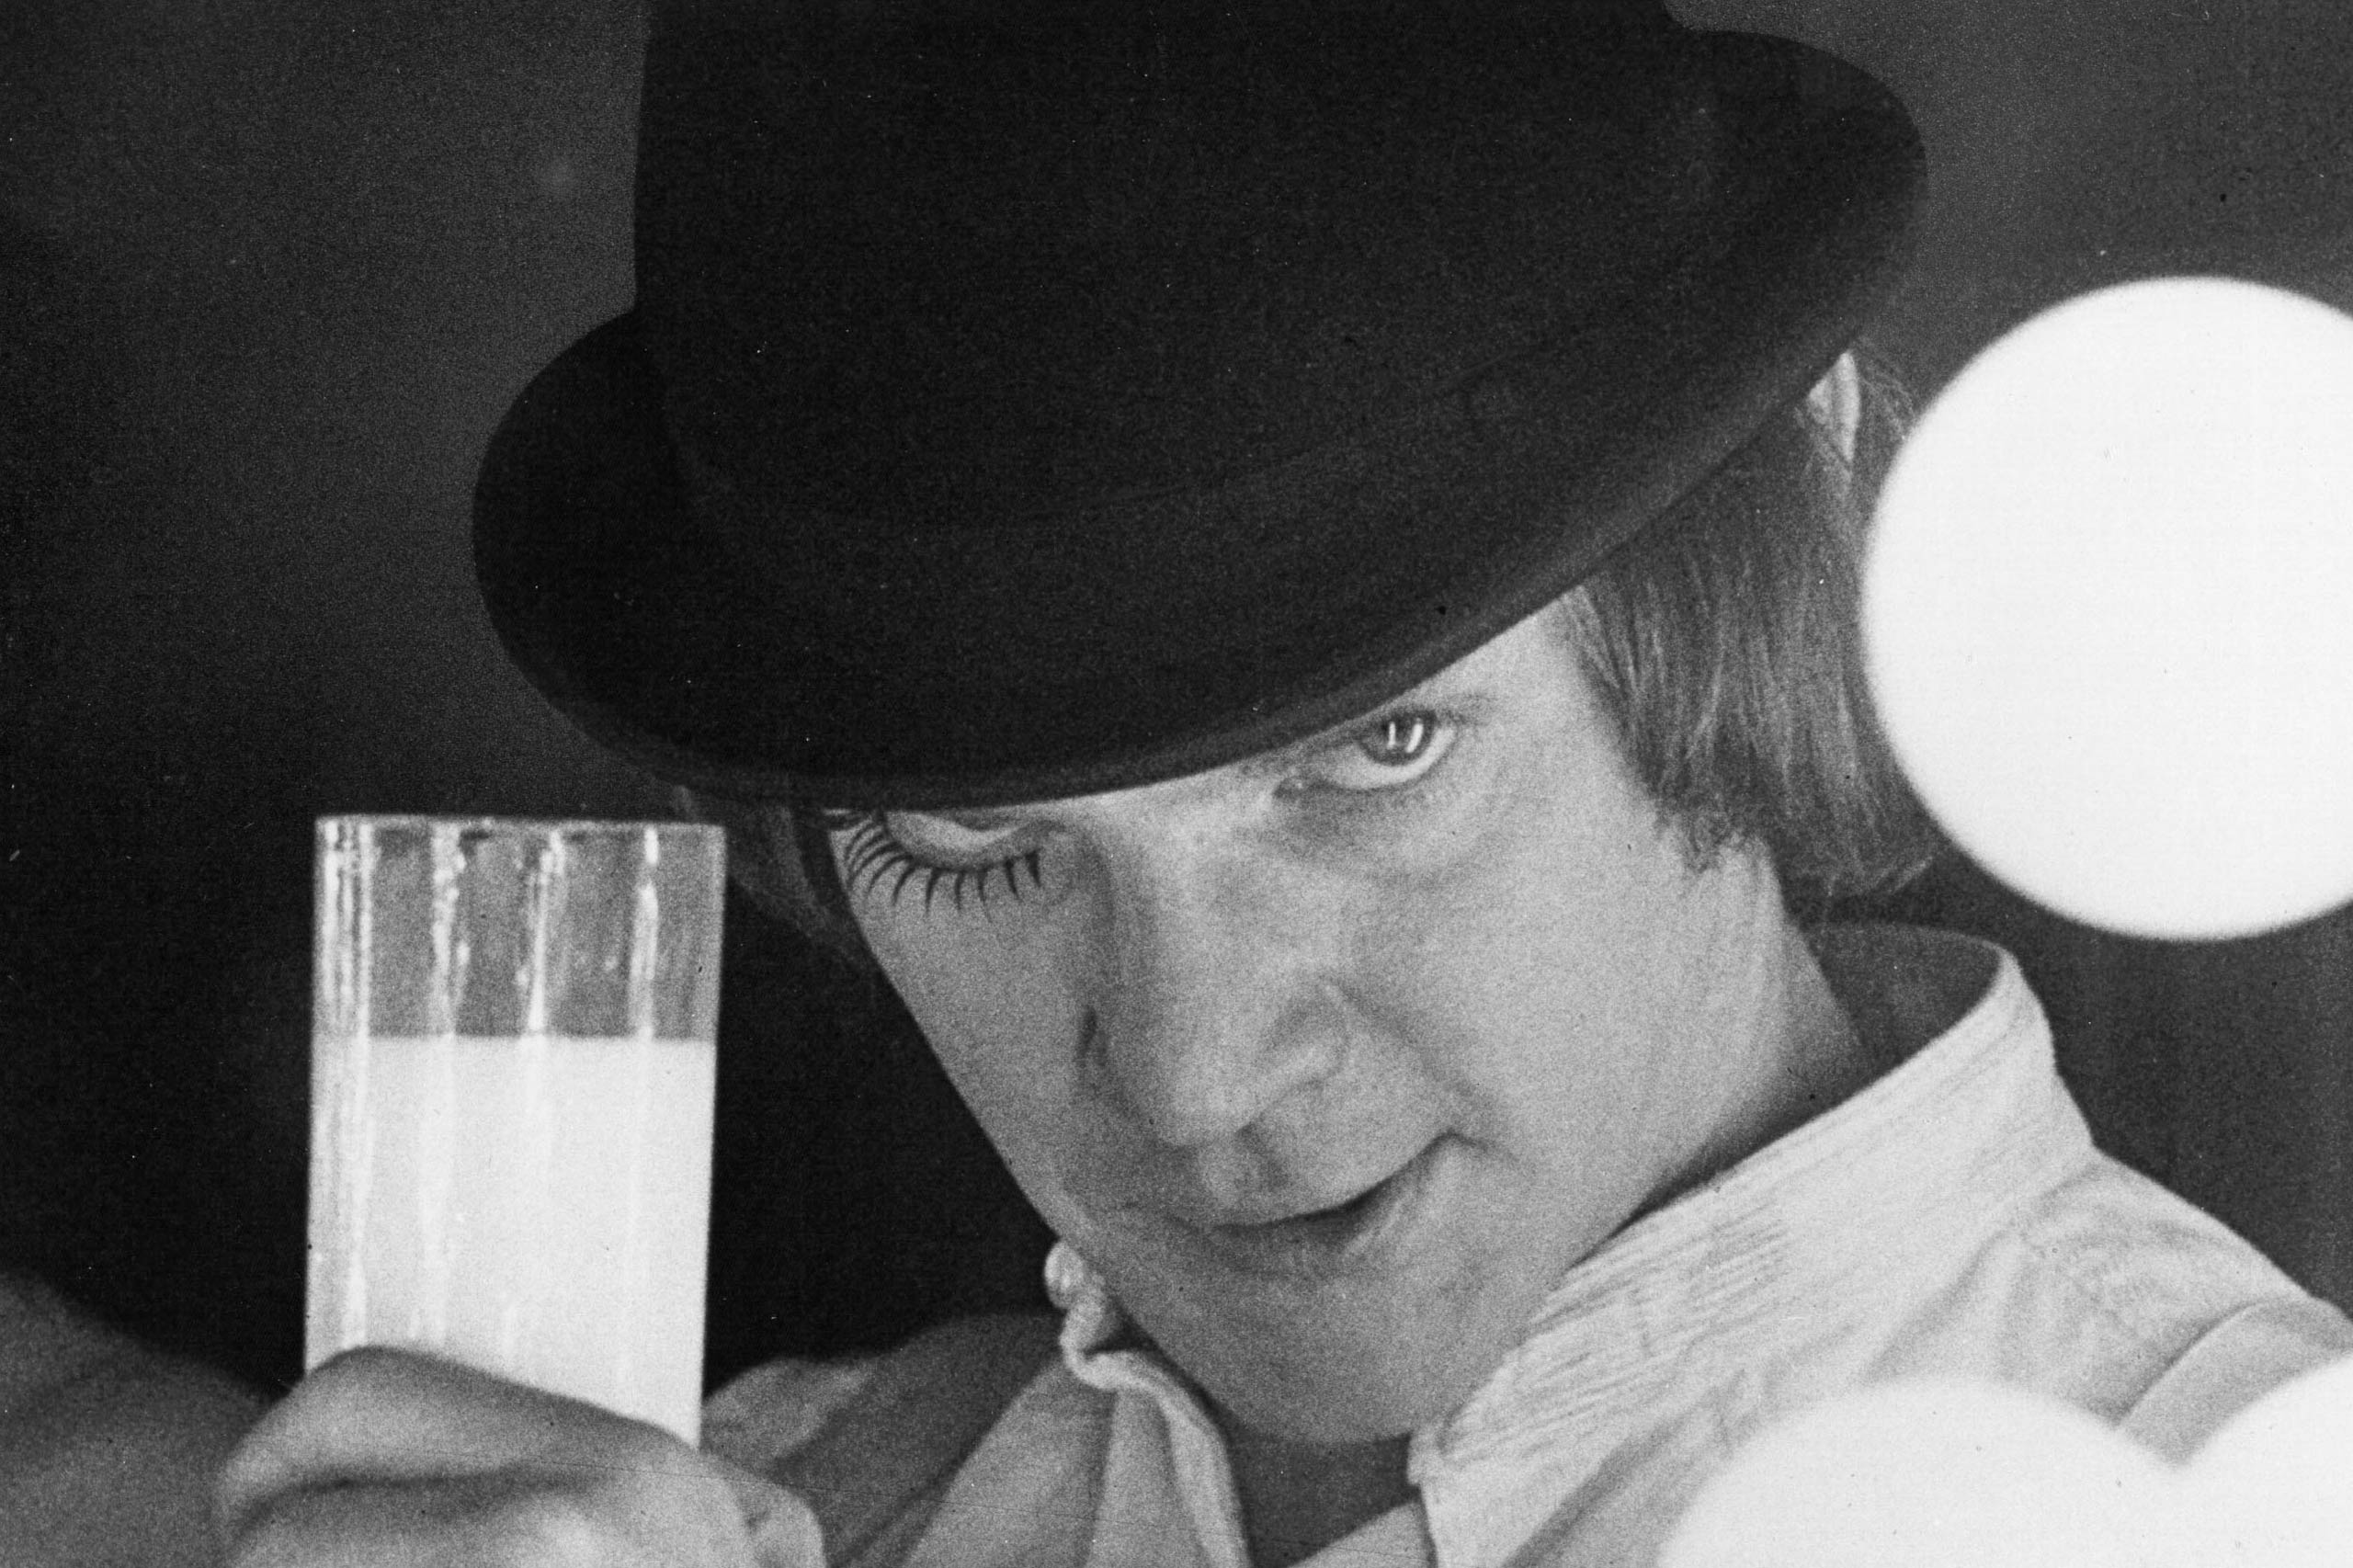 A Clockwork Orange, 1971 Stanley Kubrick’s adaptation of Anthony Burgess’s dystopian drama features shocking sex and violence, to the degree that the film was restricted within the U.K. for decades. Its central notion, of behavioral therapy as a force for evil, has also provoked debate since the film’s release.